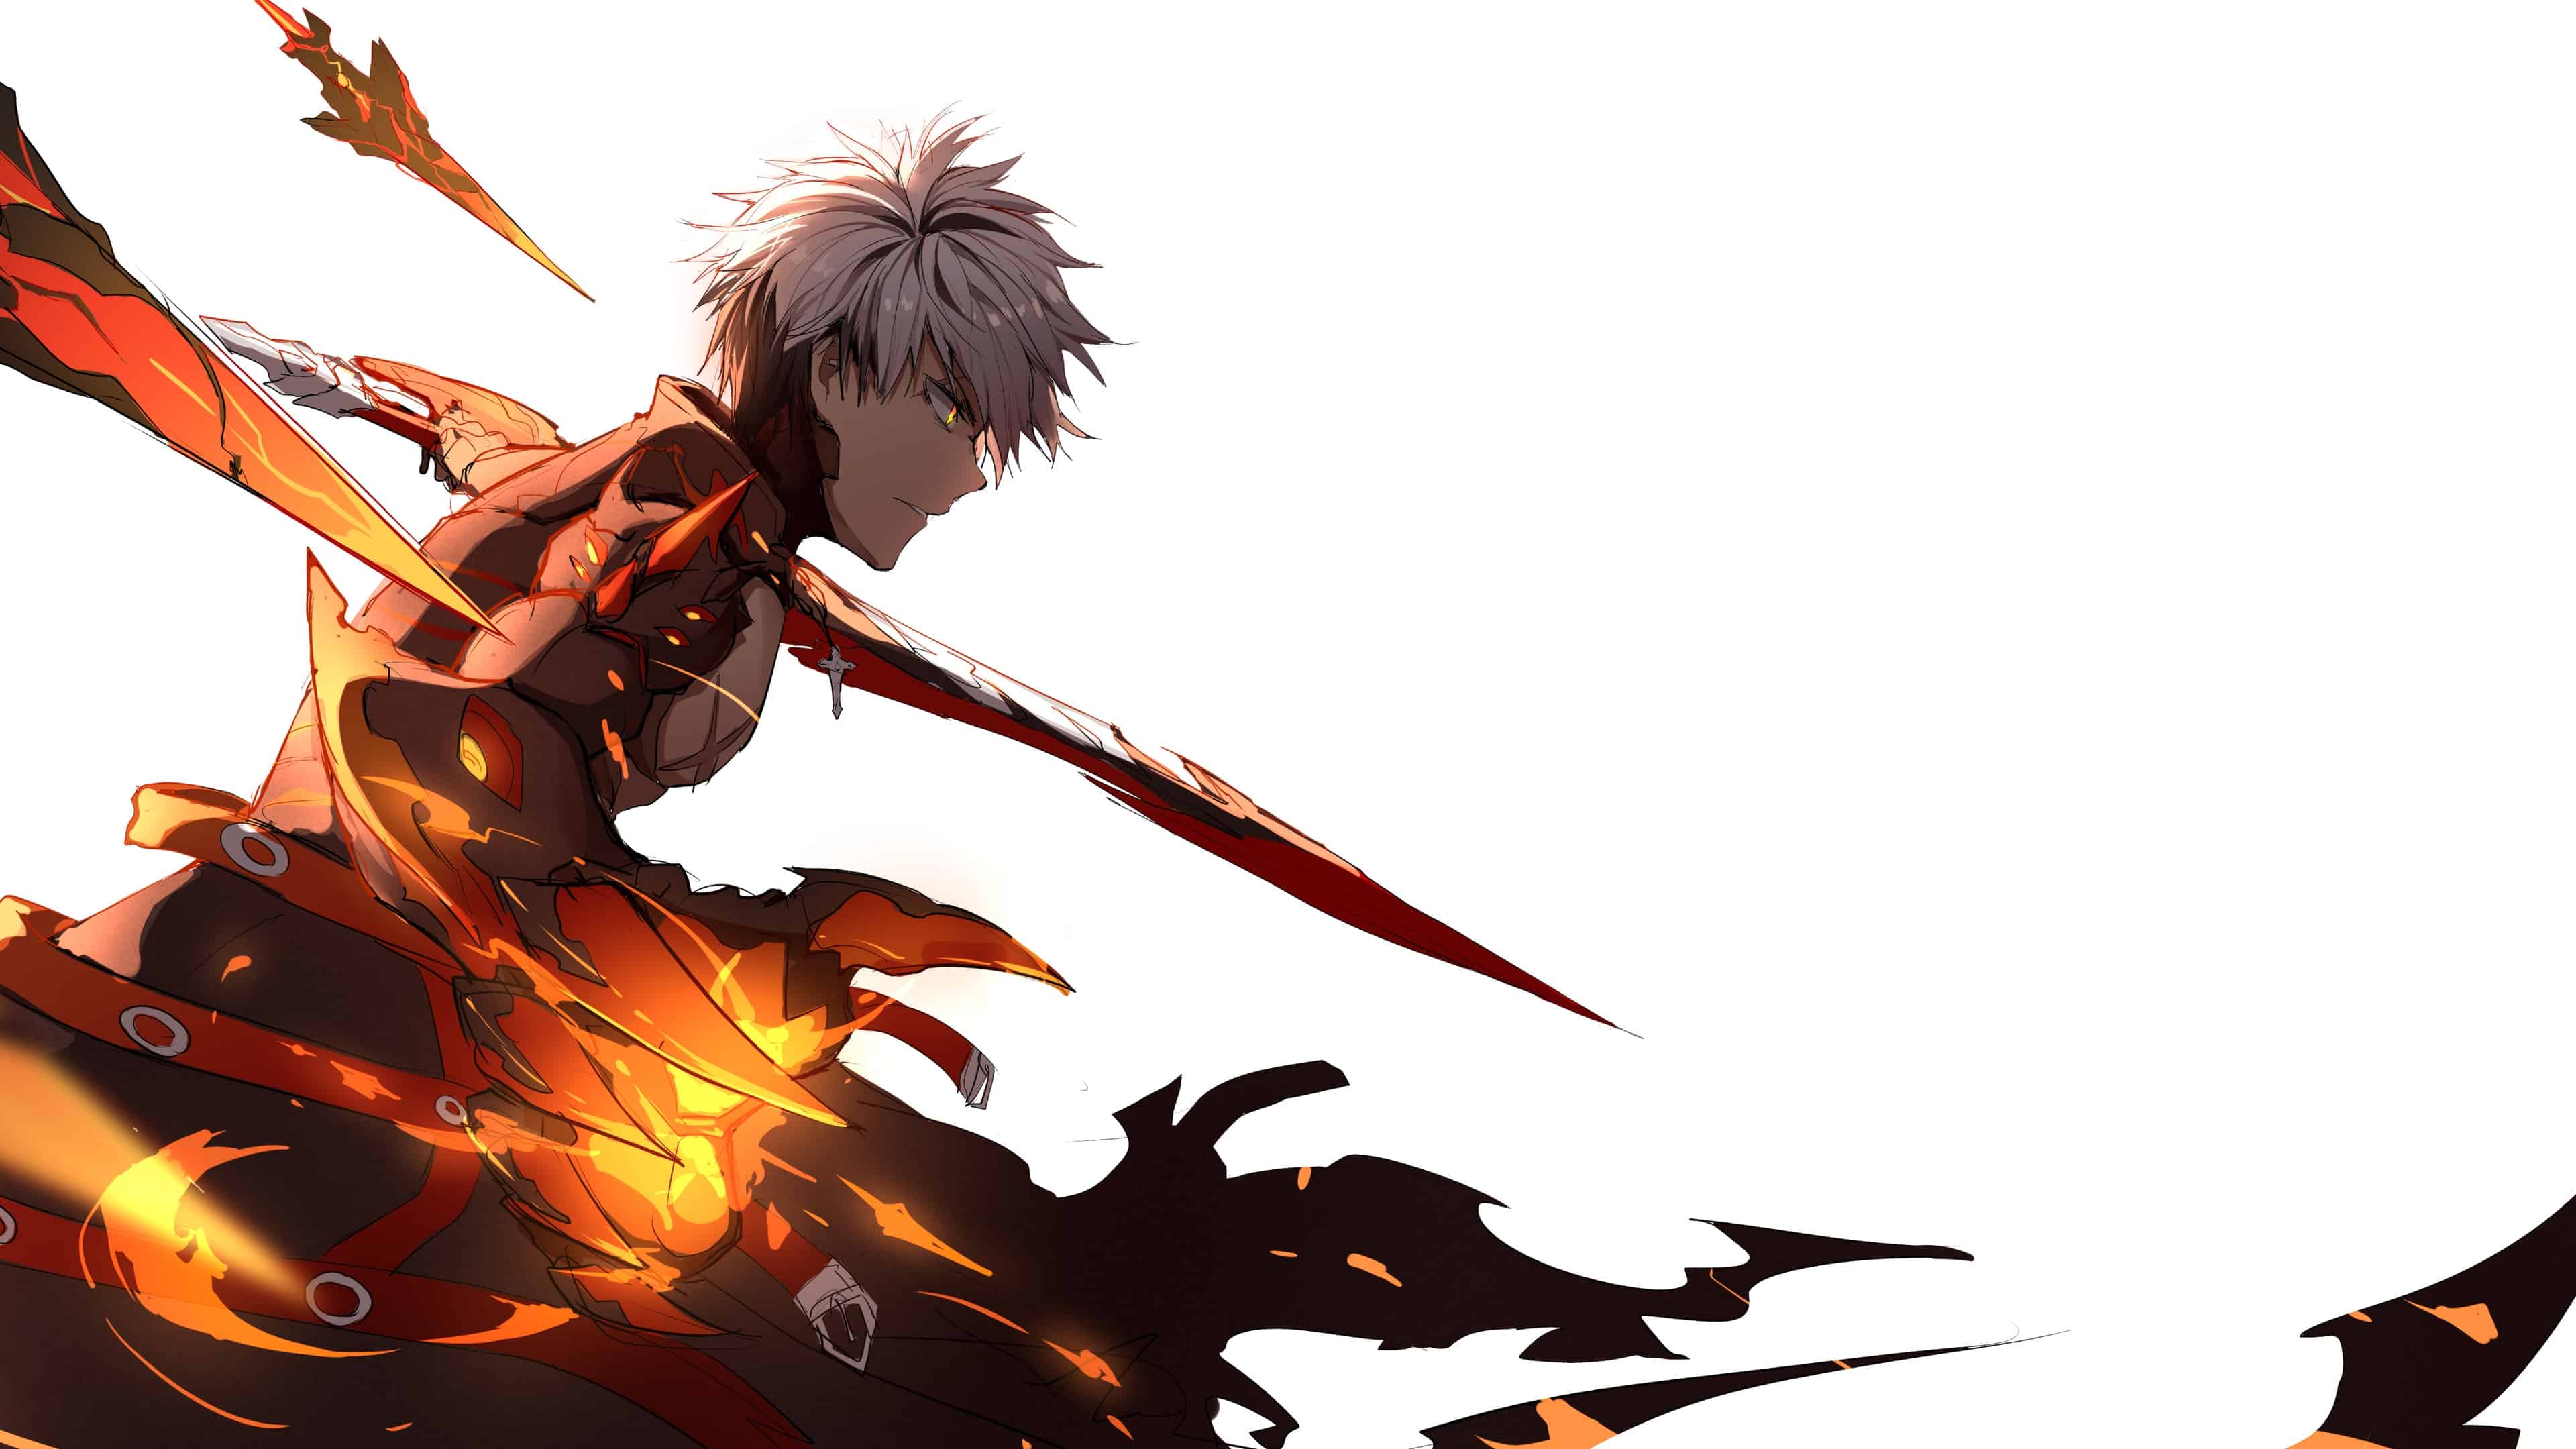 Download wallpaper anime, elsword, tyan, section art in resolution 2560x1440